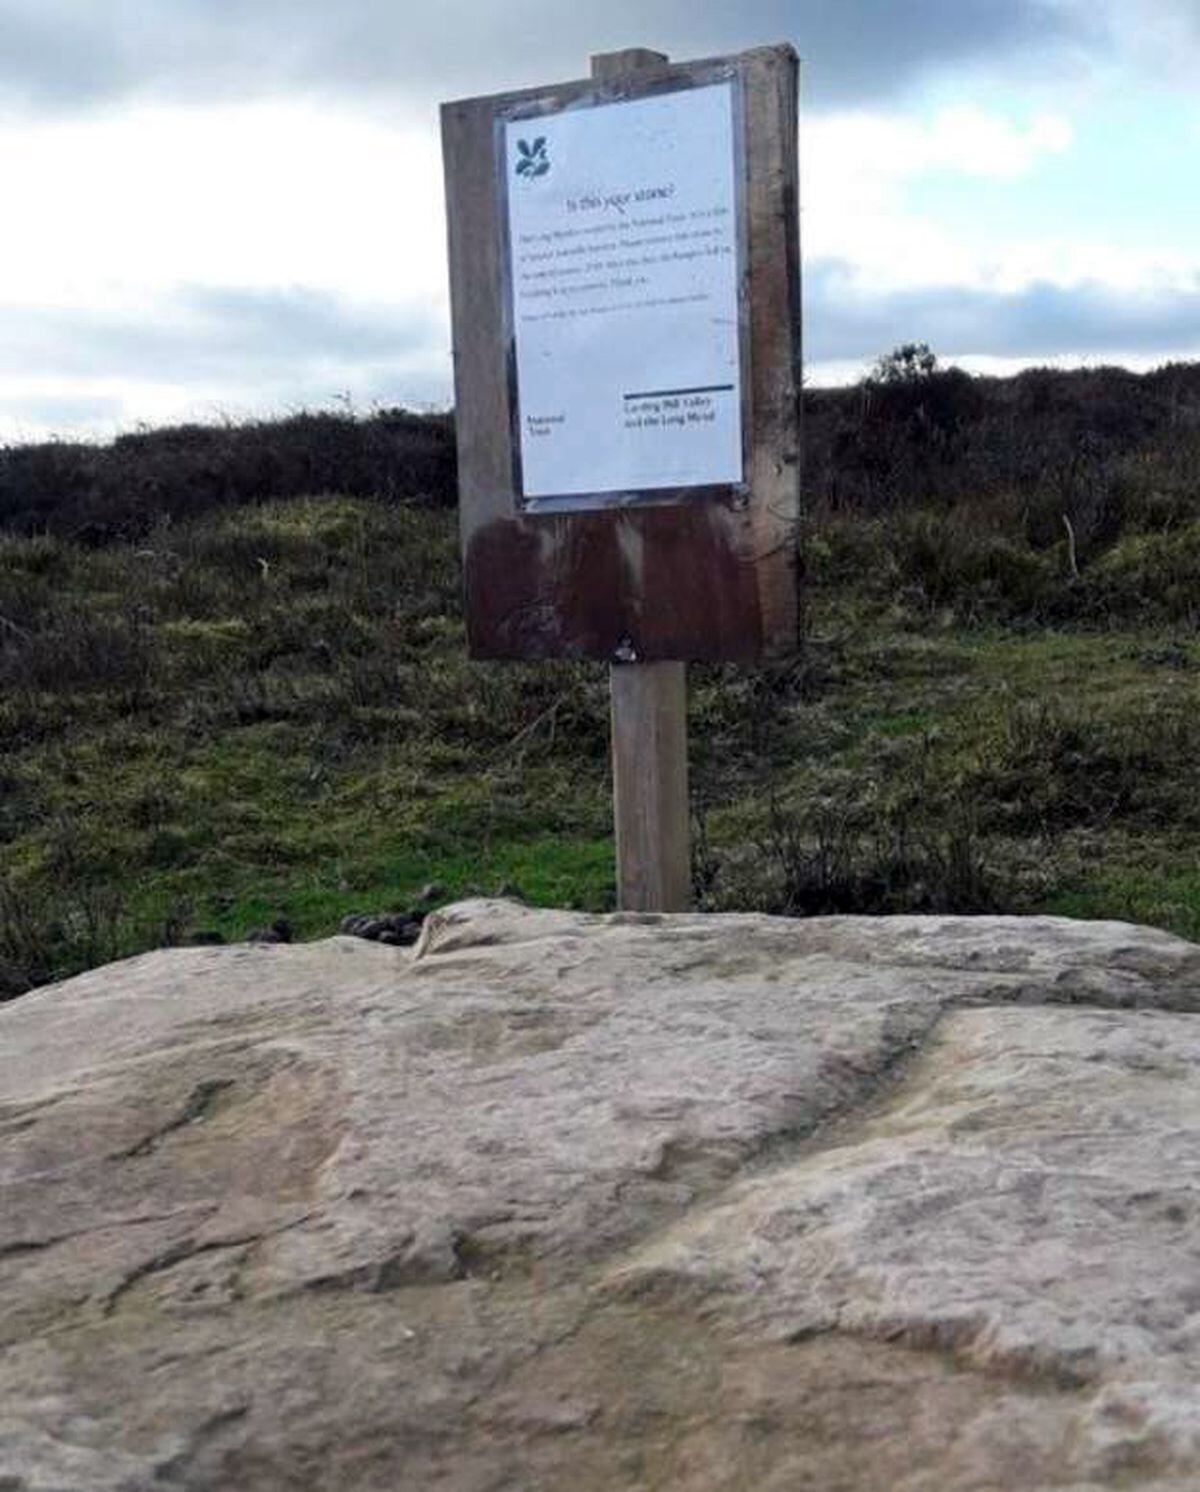 A sign placed next to the mystery rock. Photo: National Trust.